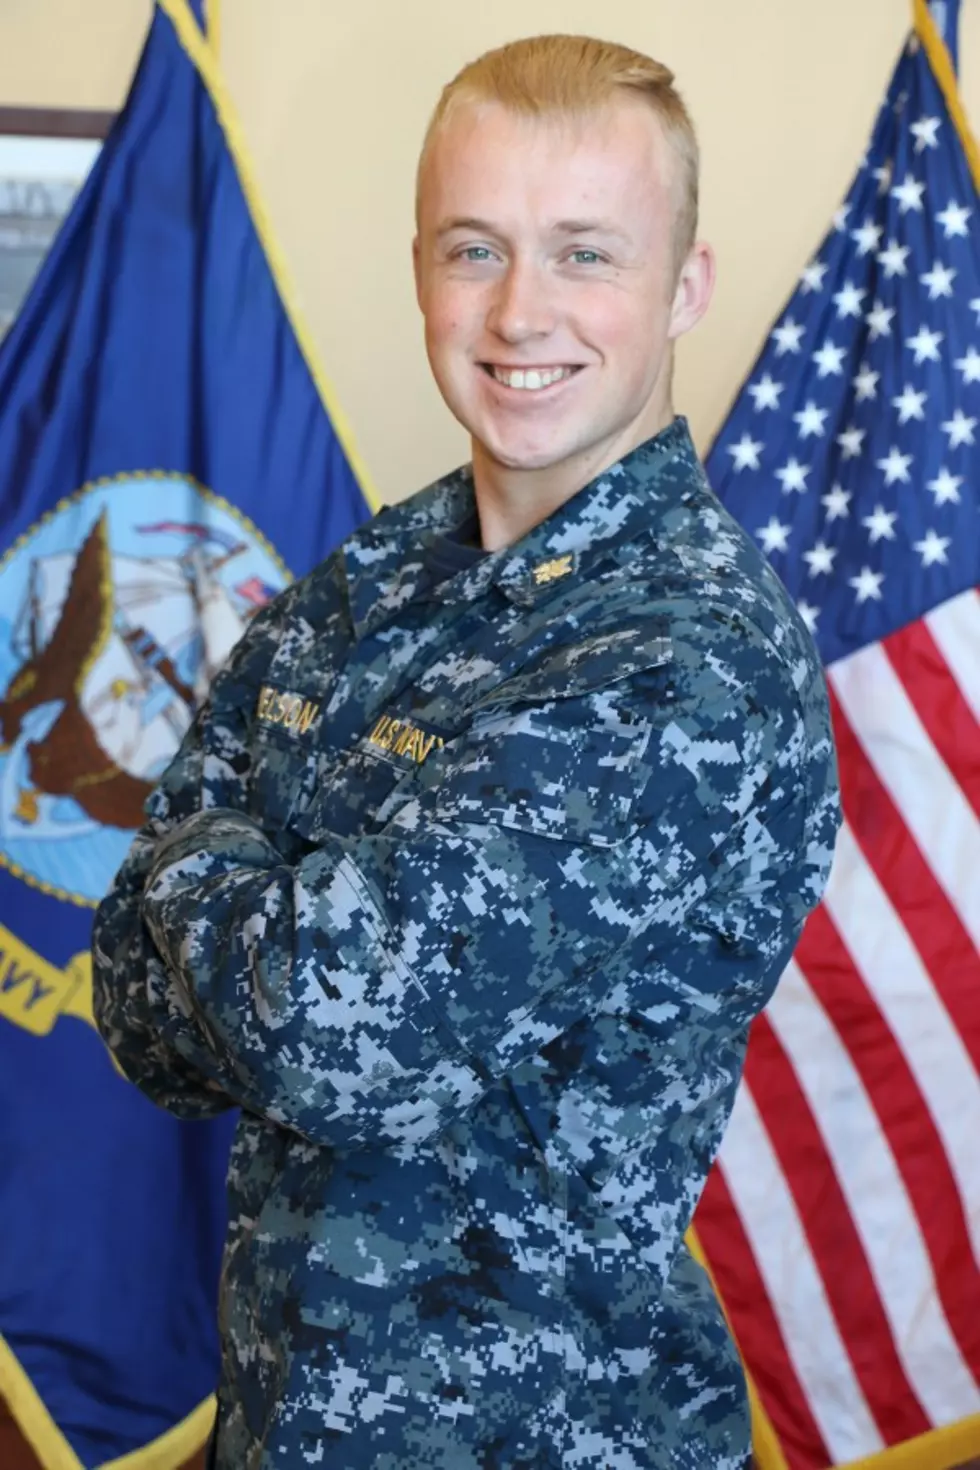 US Navy Trainee Gives Credit to His Boise Parents